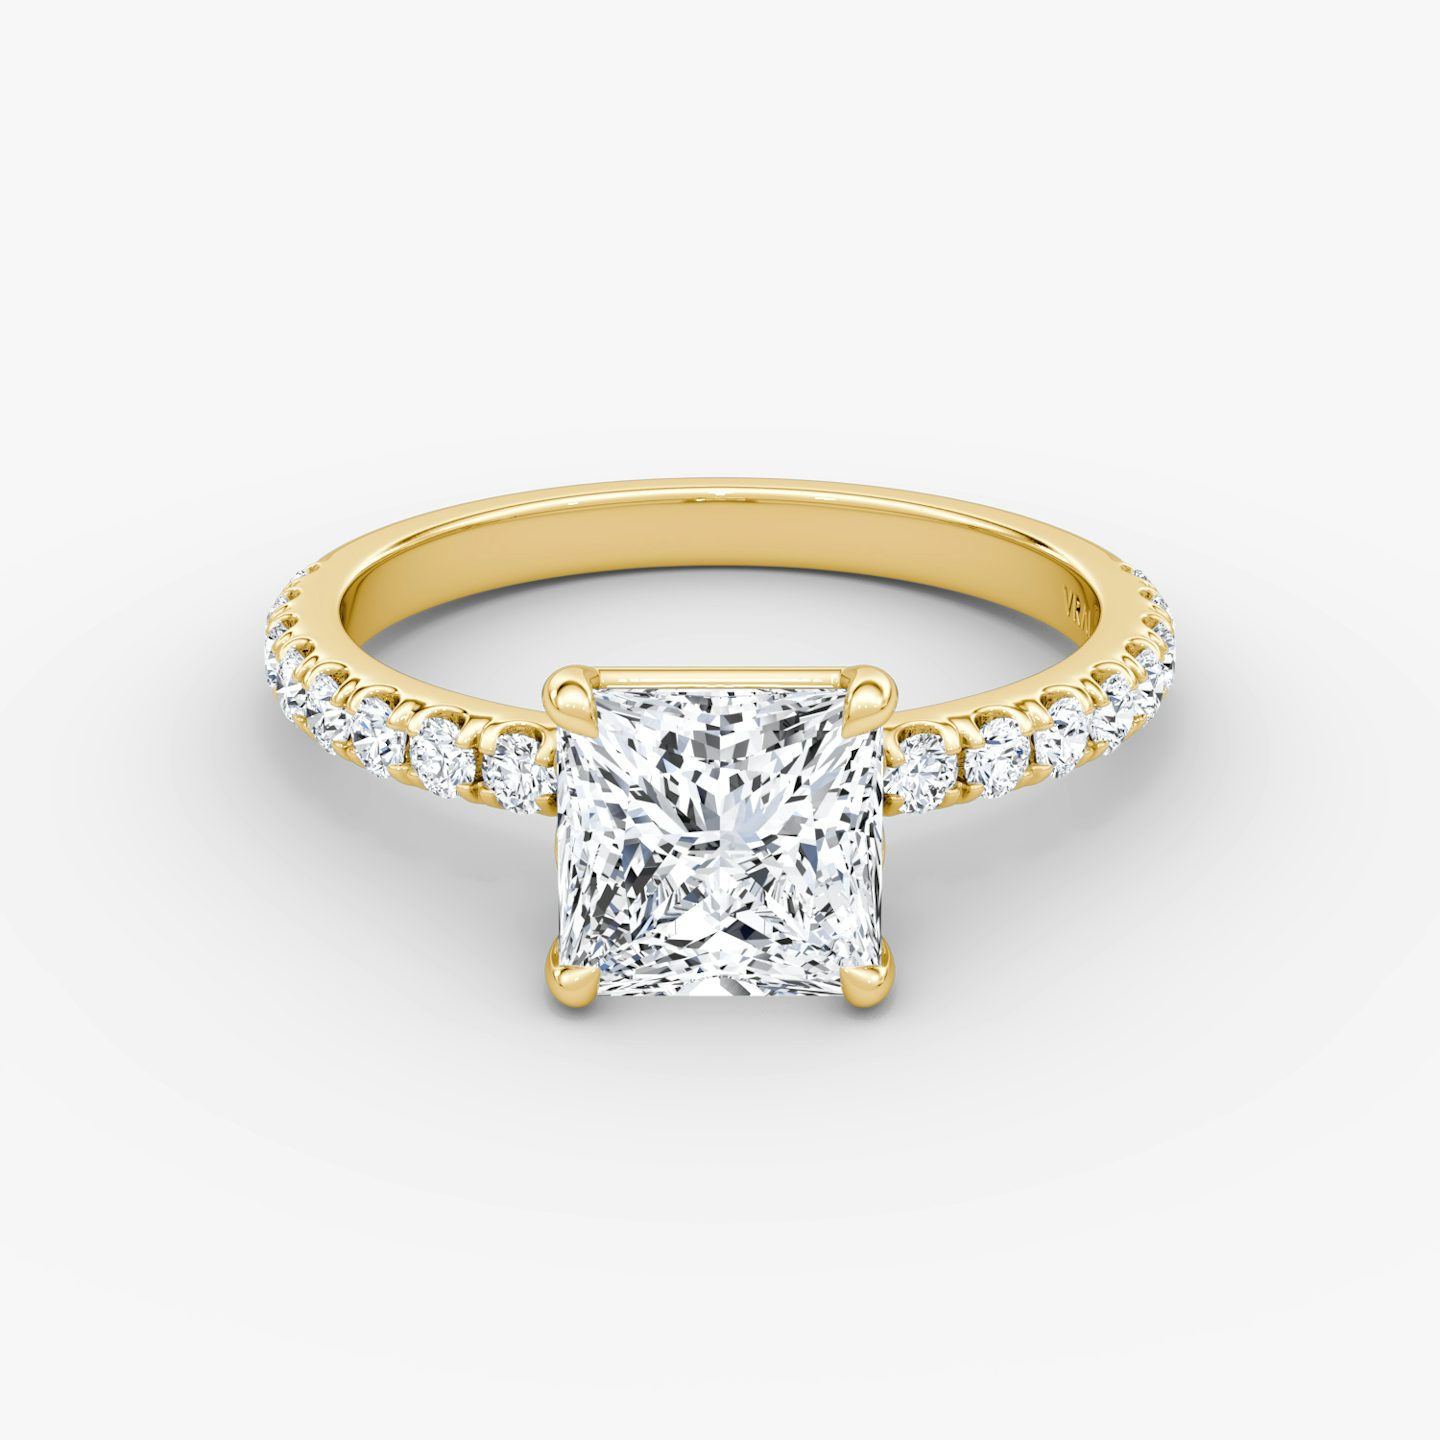 The Signature | Princess | 18k | 18k Yellow Gold | Band: Pavé | Band width: Large | Setting style: Plain | Diamond orientation: vertical | Carat weight: See full inventory